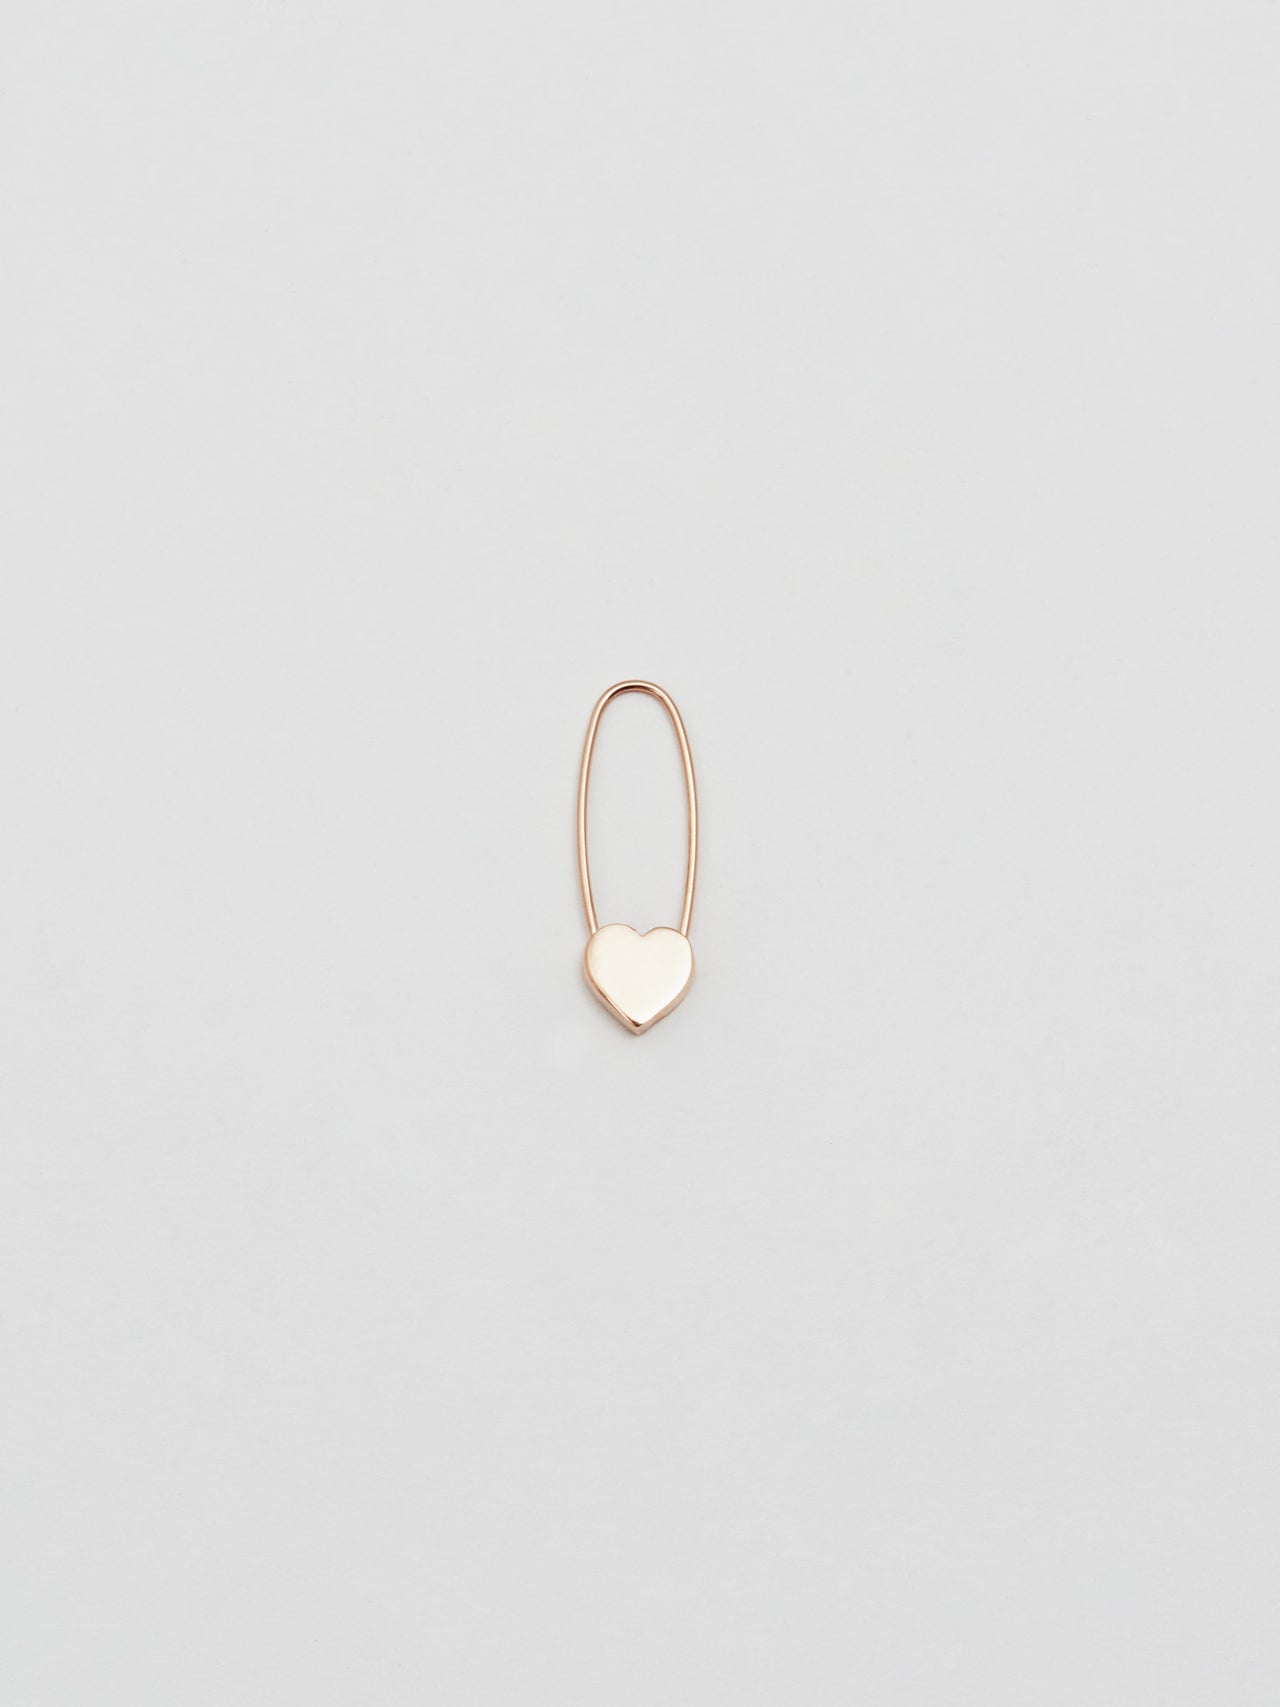 Rose Gold Heart Safety Pin pictured on grey background.